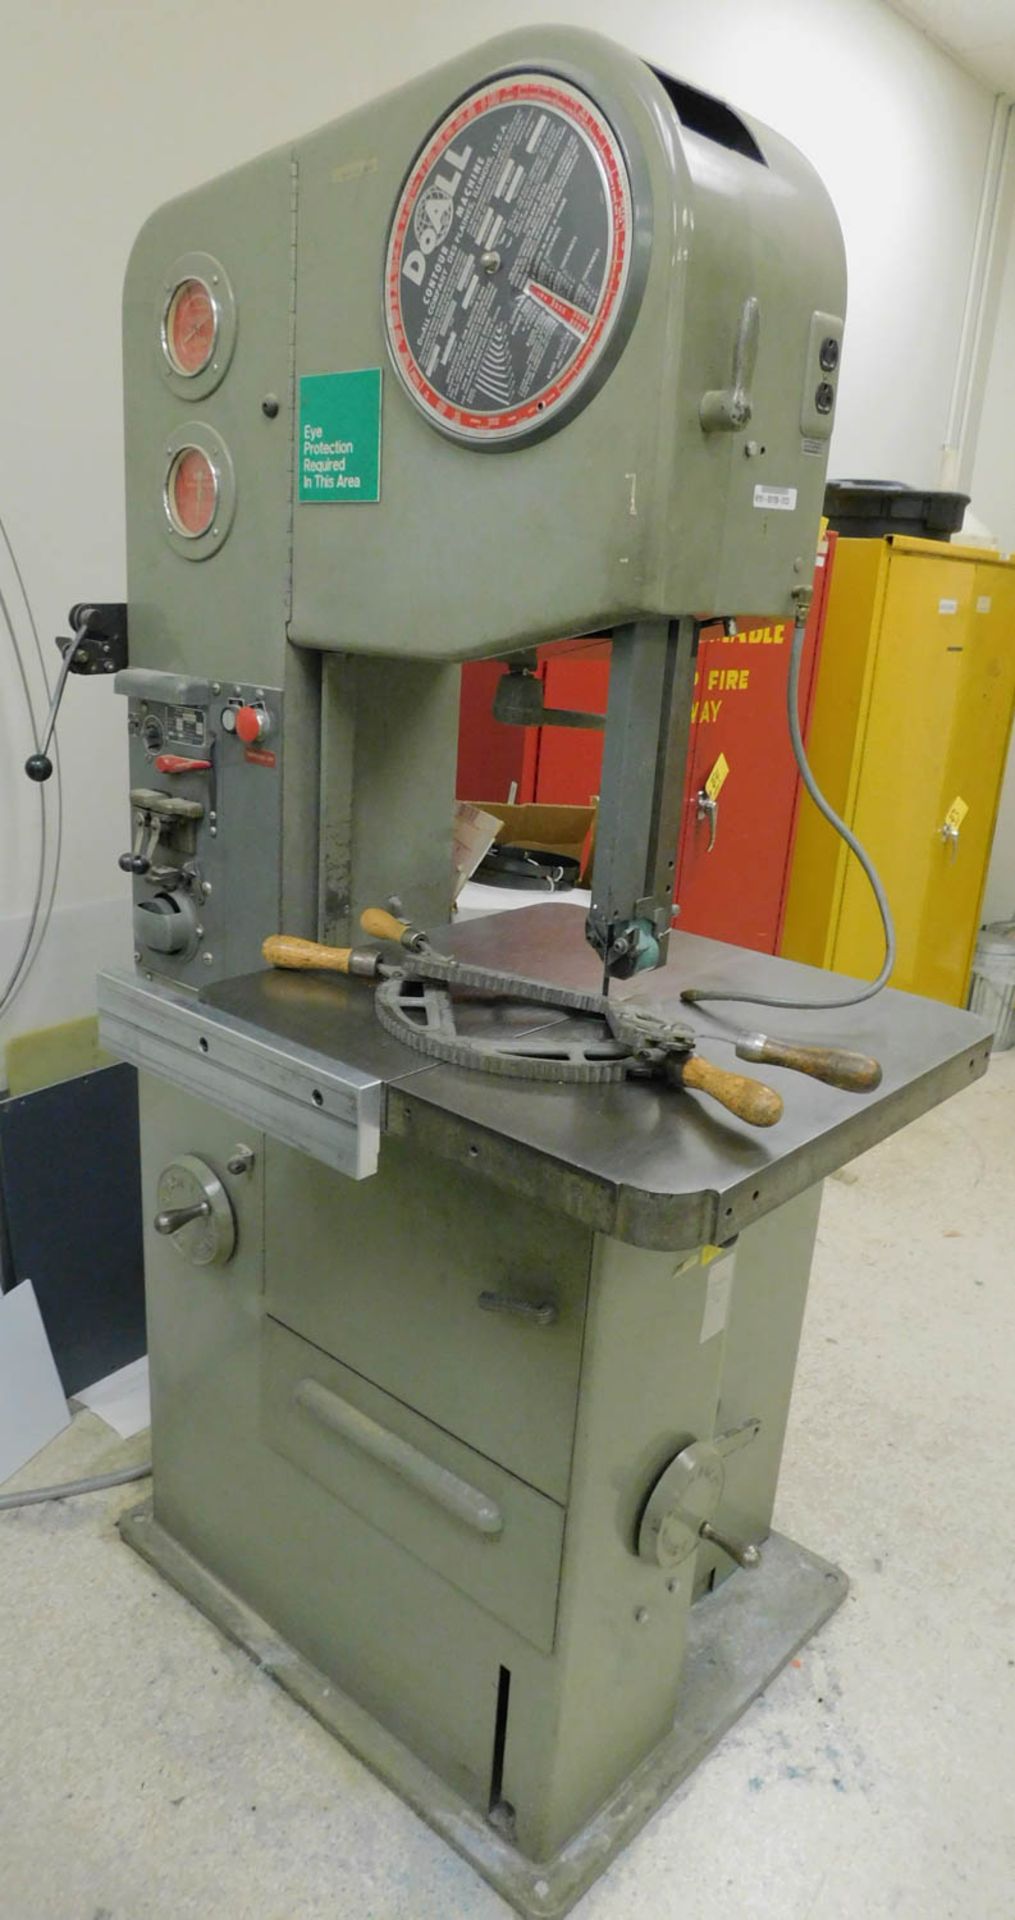 DOALL 1612-1 VERTICAL BANDSAW W/BLADE WELDING GRINDING ATTACHMENT, S/N: 148-65871 (POUGHKEEPSIE) - Image 2 of 3